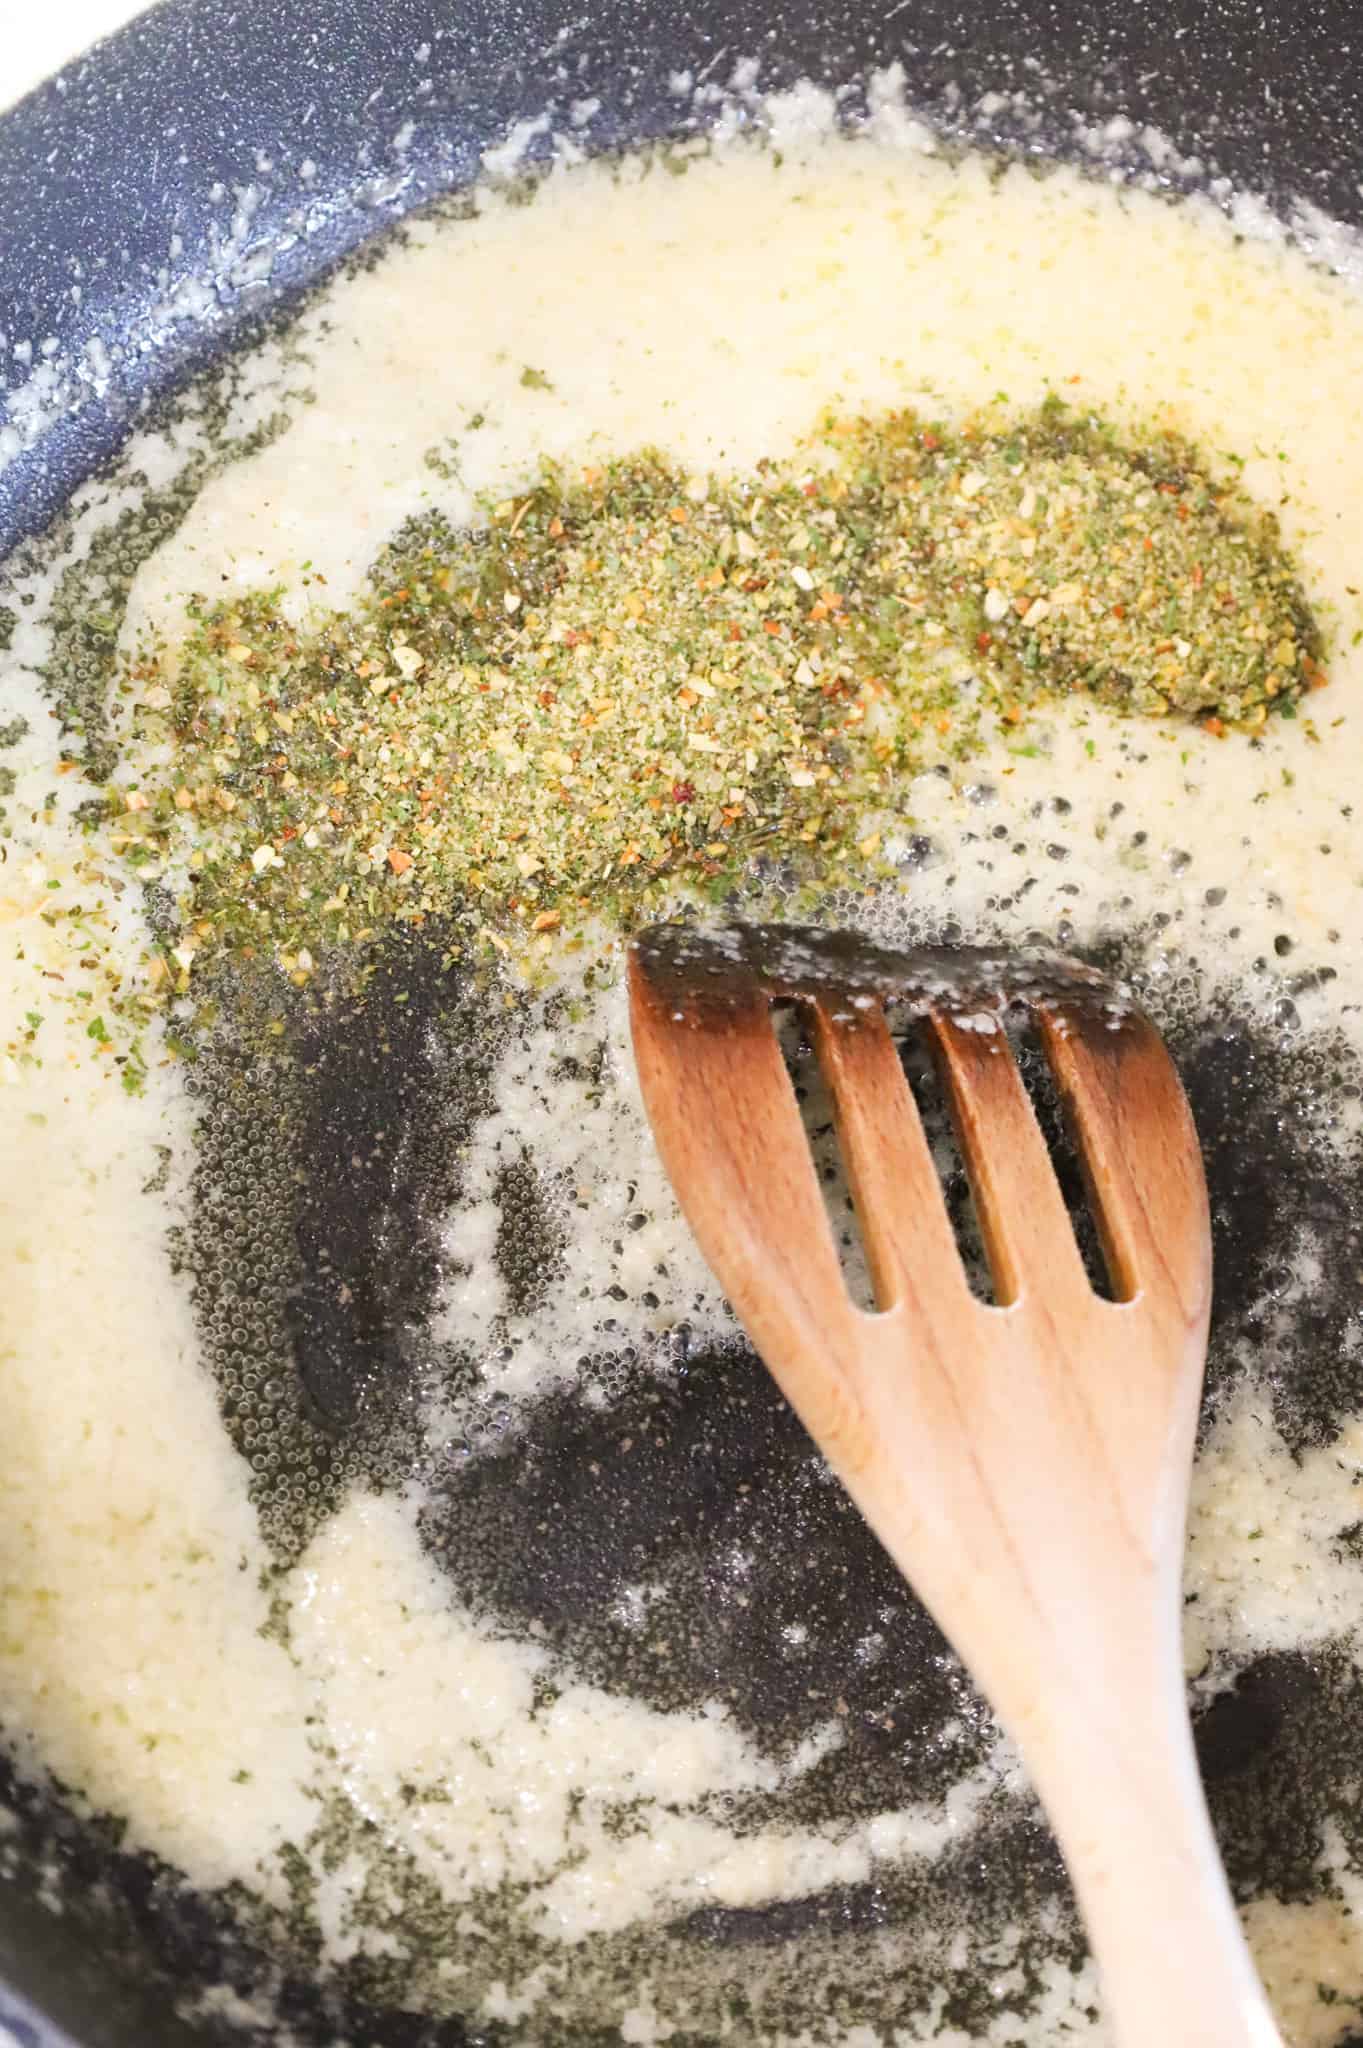 Italian seasoning added to skillet with melted butter and garlic puree